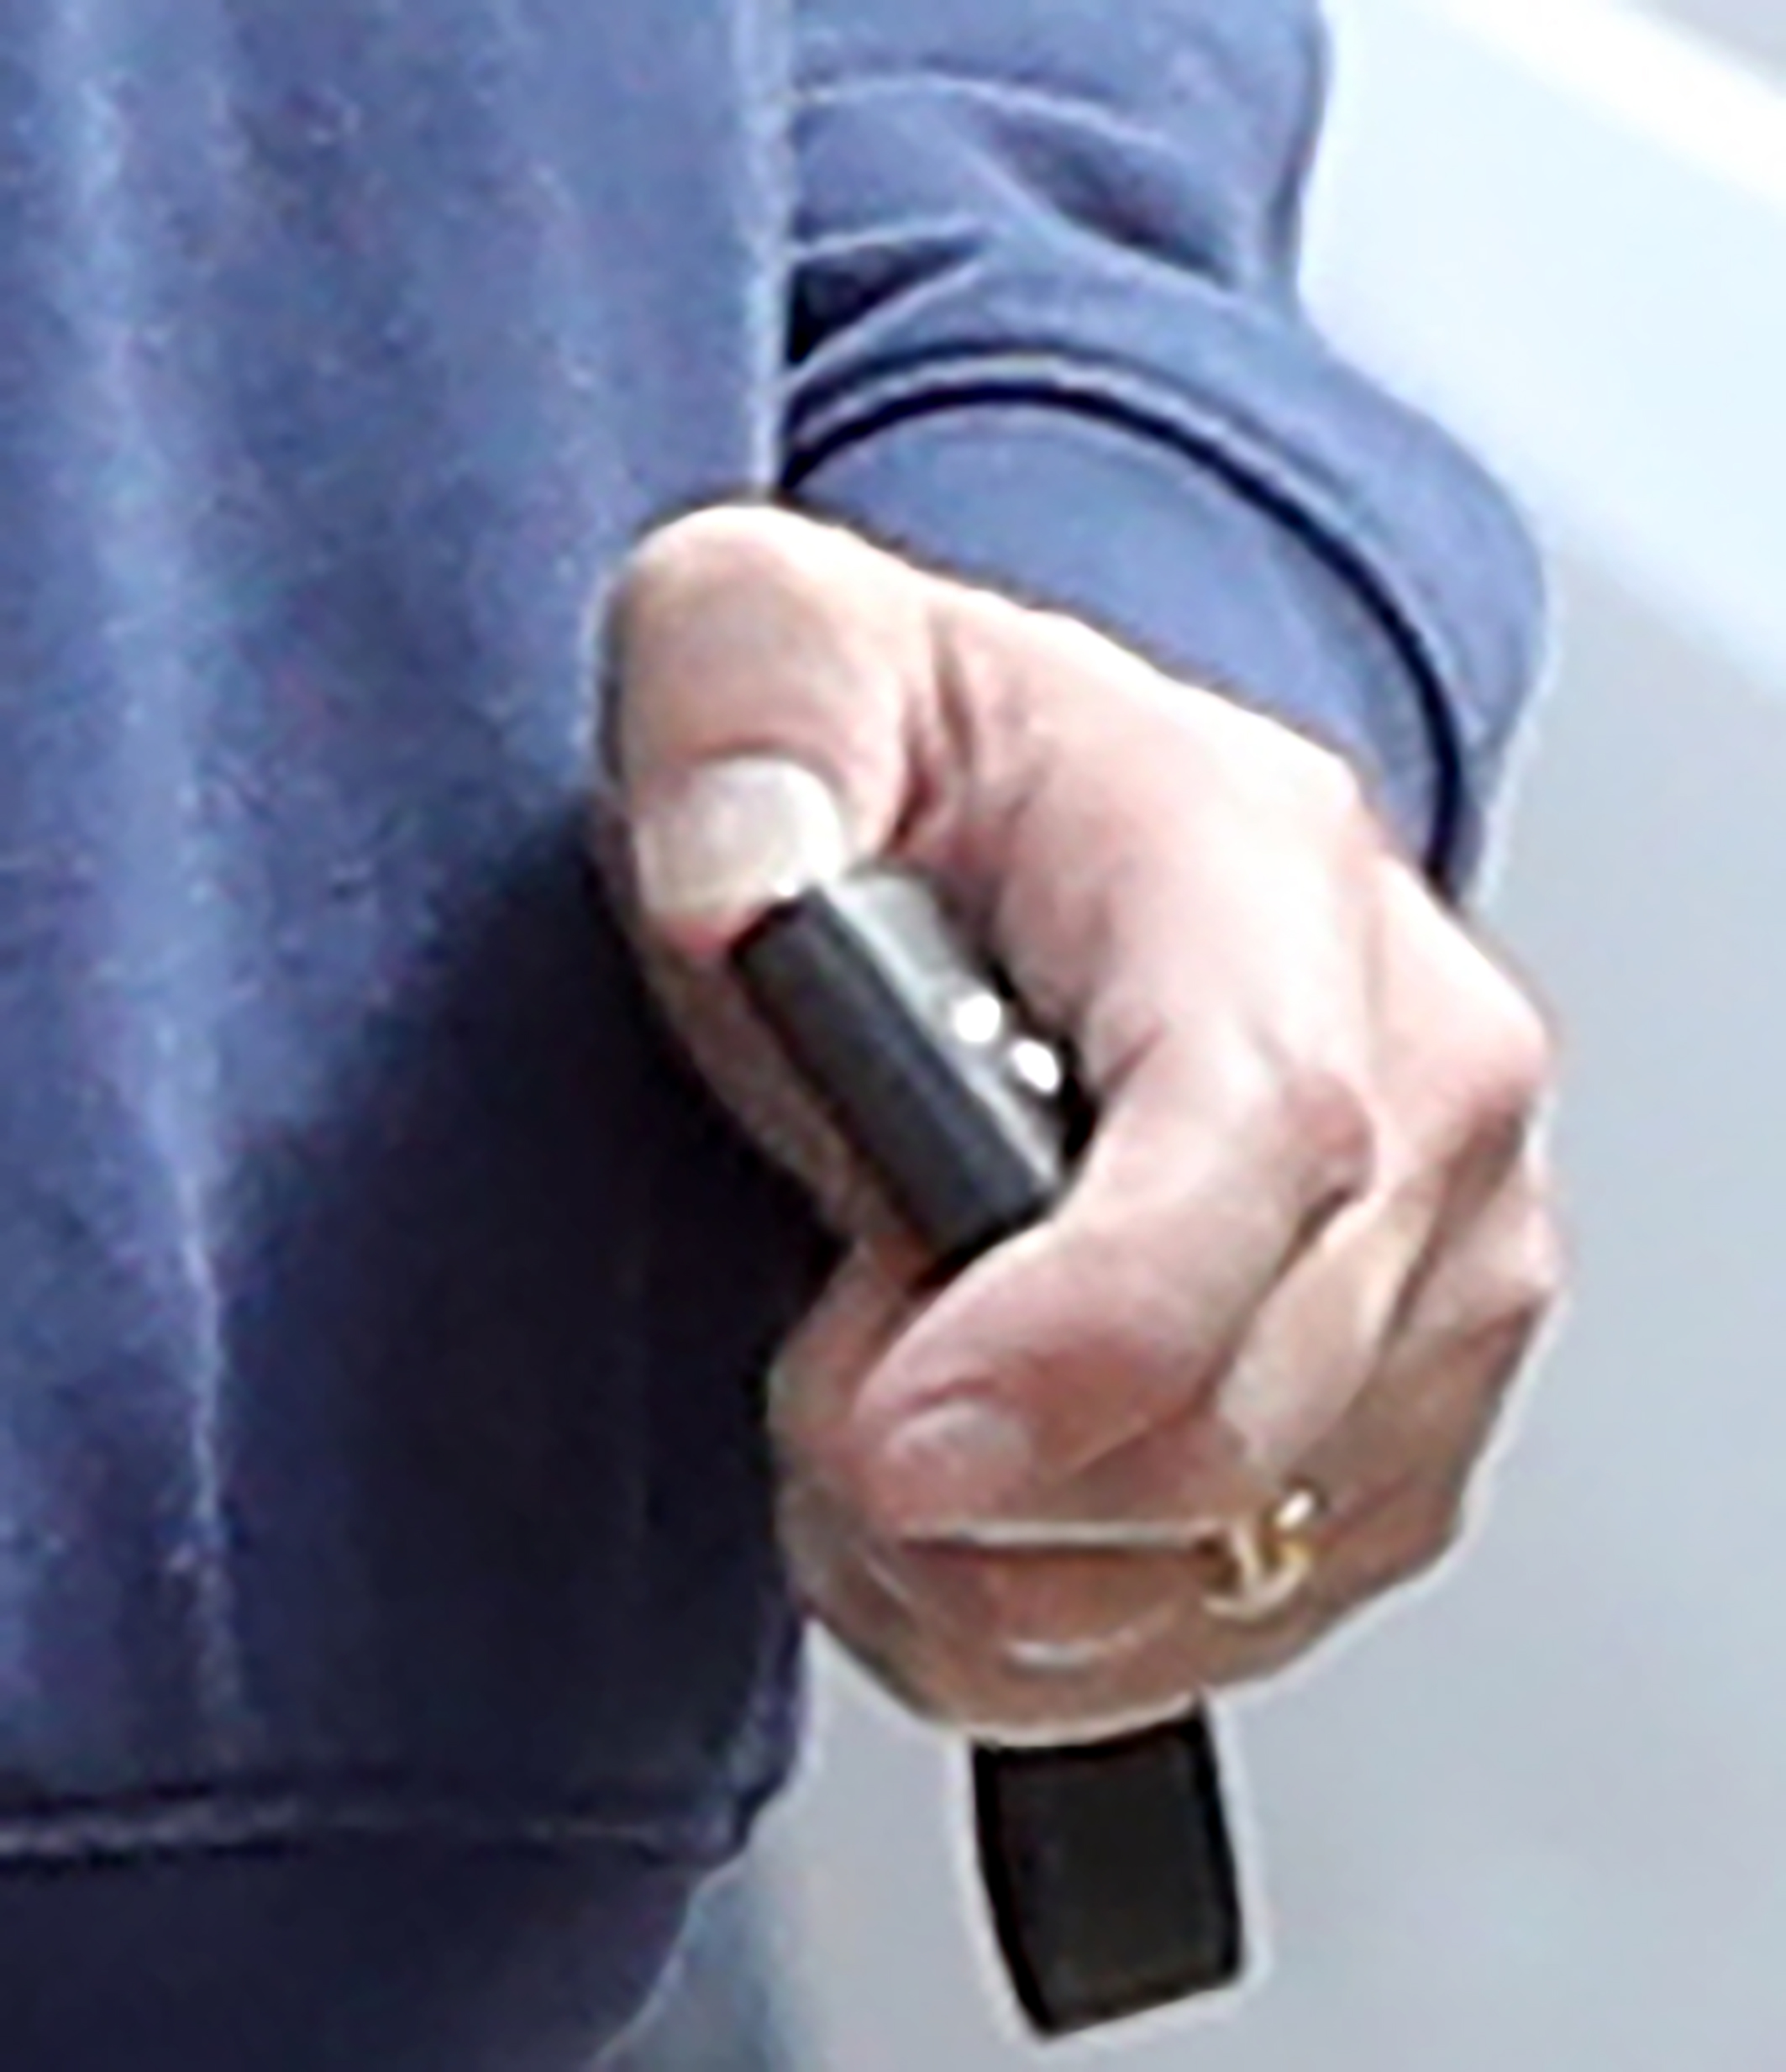 The ring could be seen on his left hand